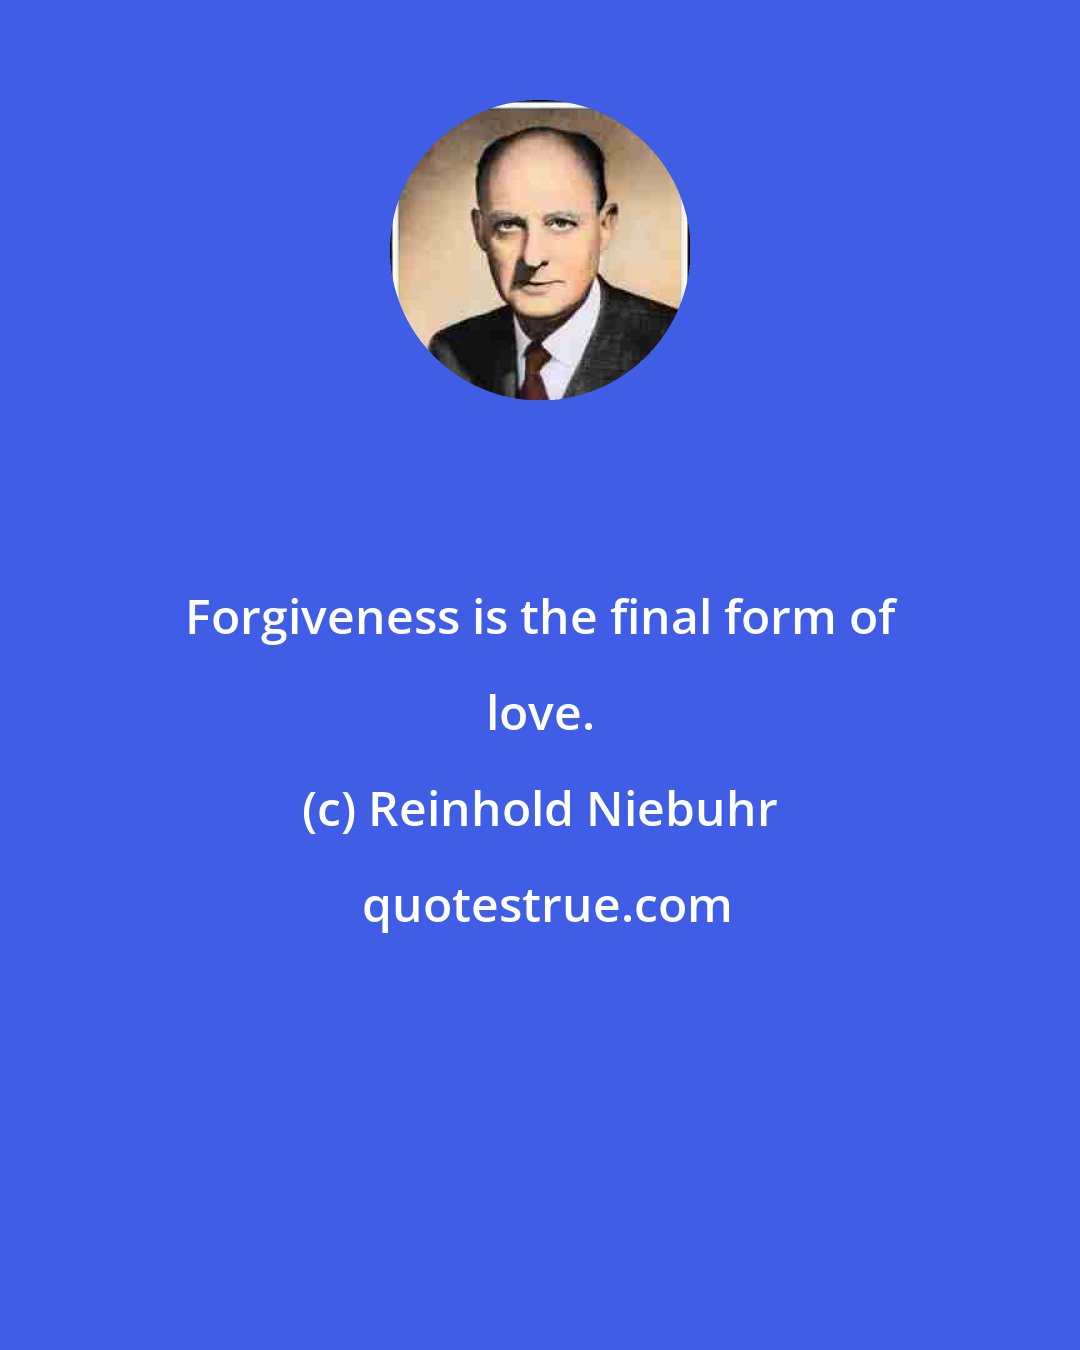 Reinhold Niebuhr: Forgiveness is the final form of love.